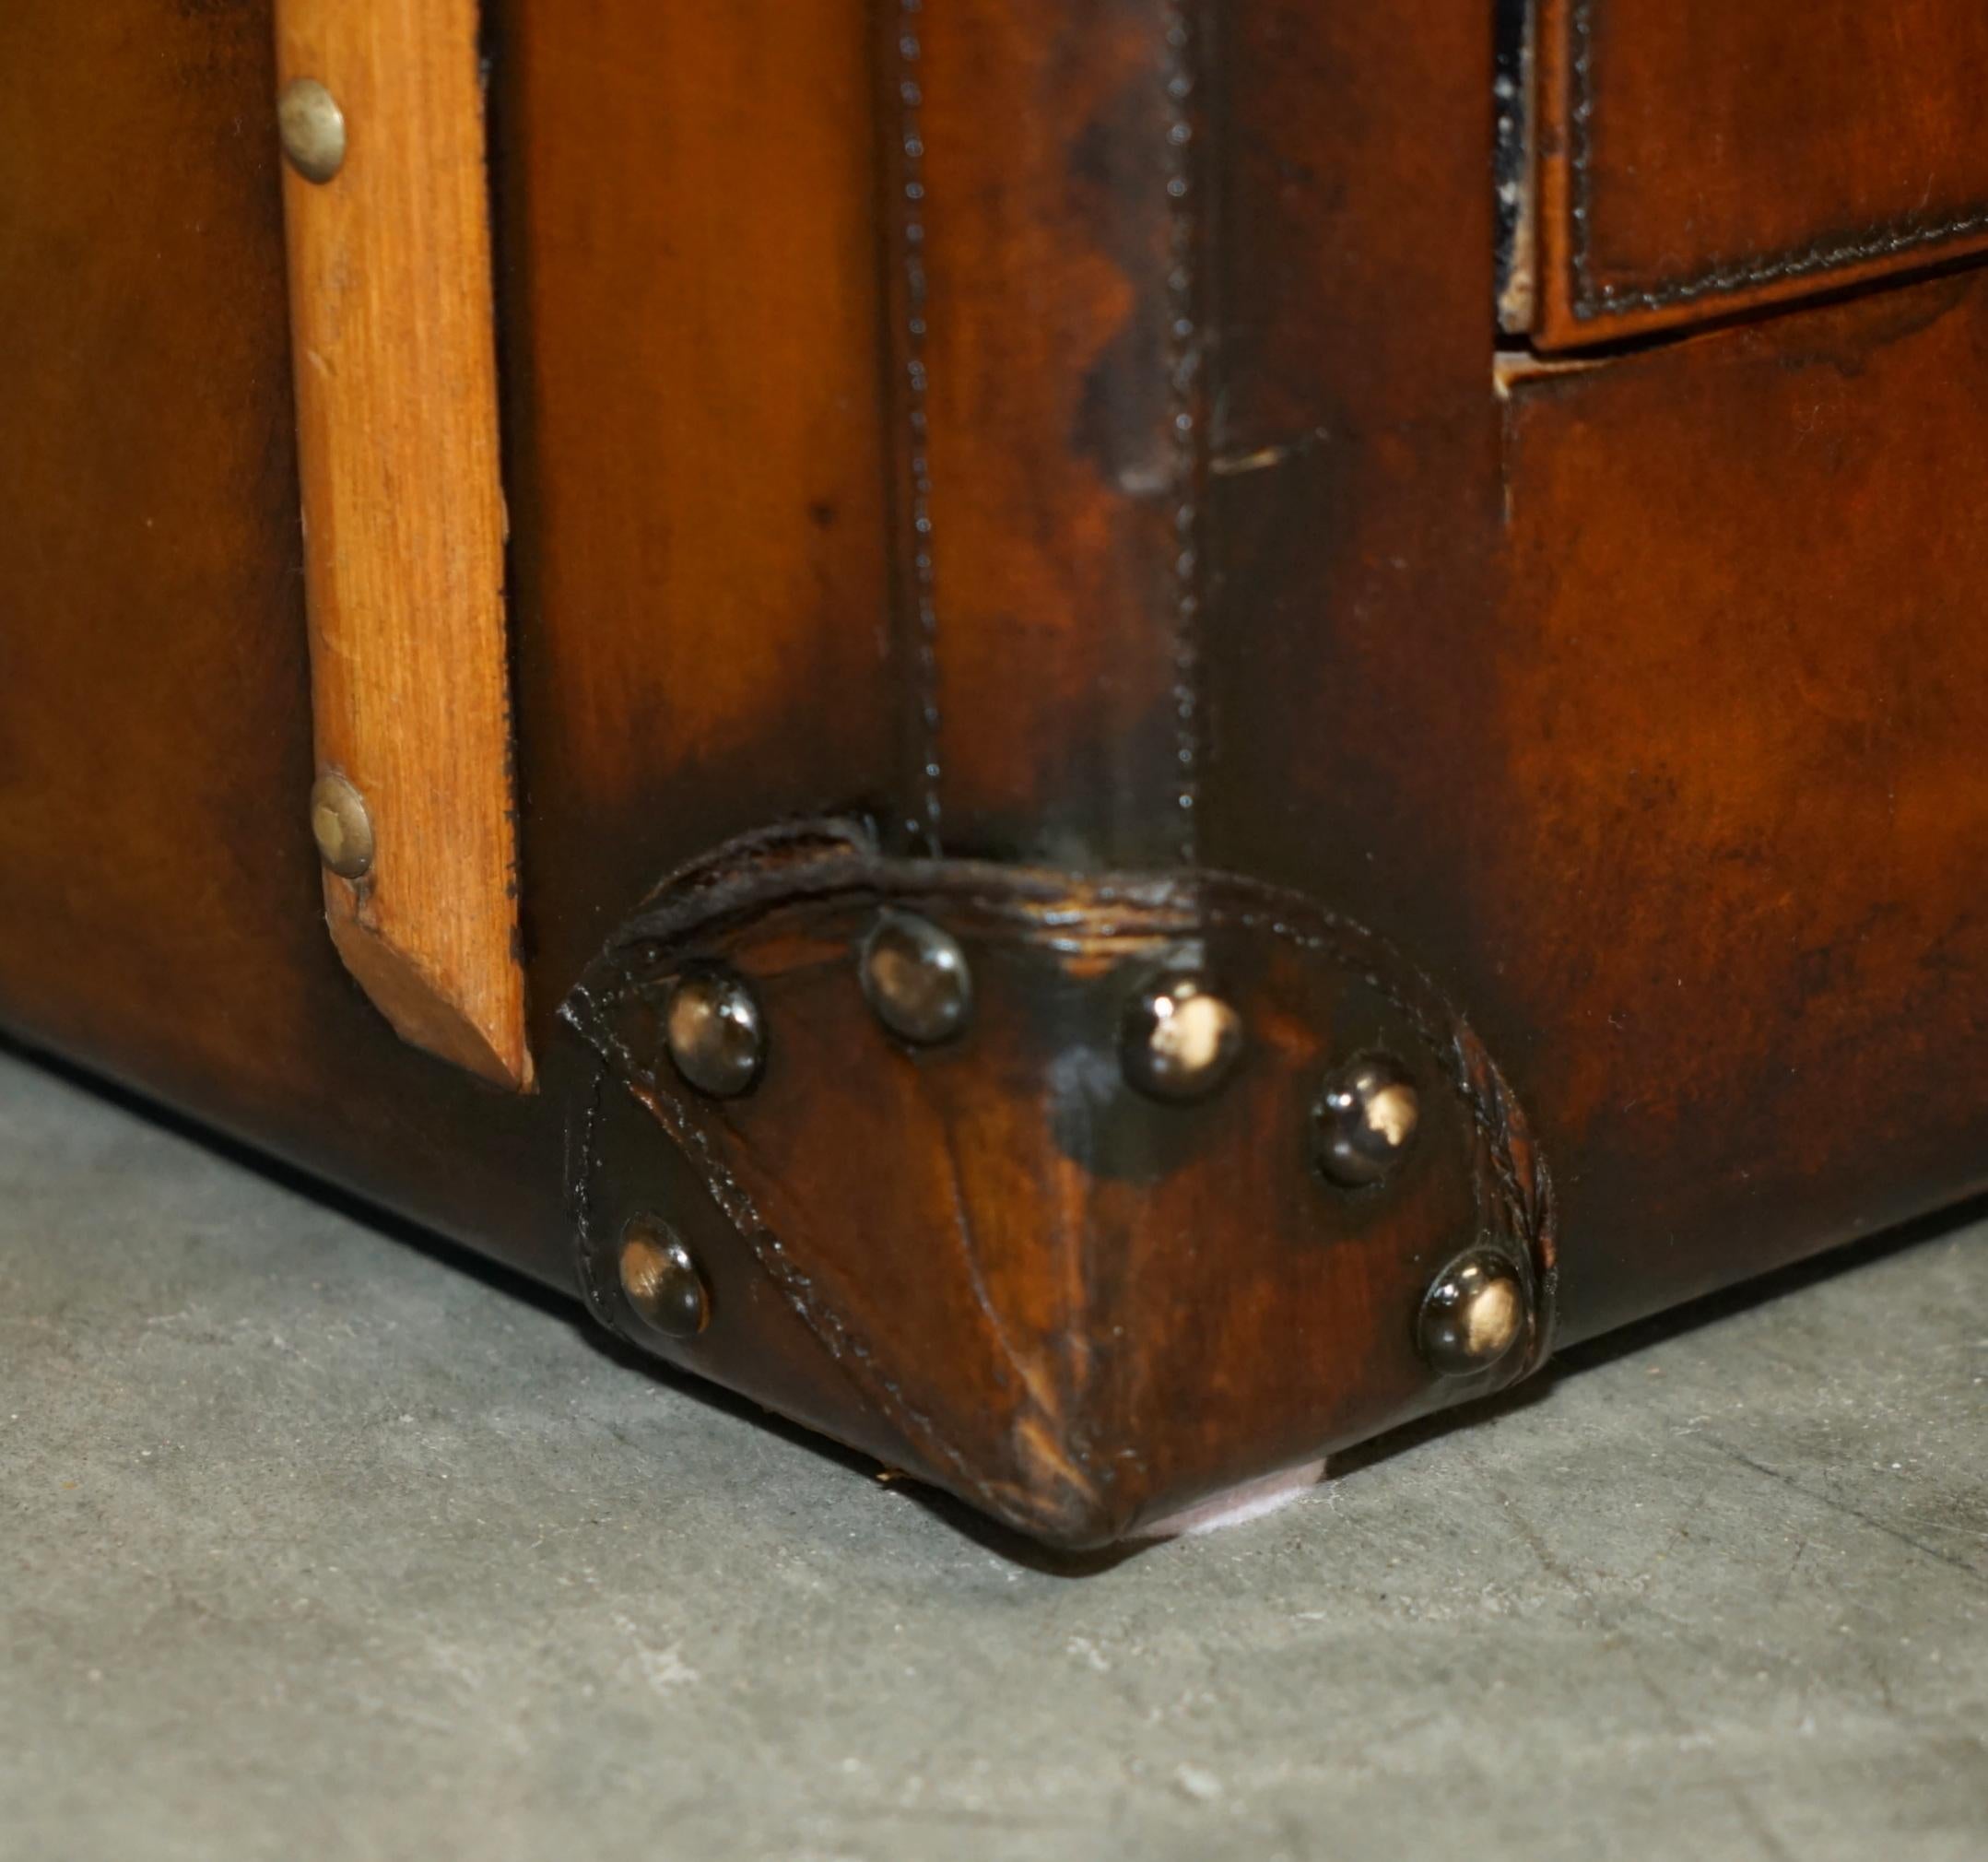 Leather FULLY RESTORED ViNTAGE HAND DYED BROWN LEATHER STEAMER TRUNK COFFEE TABLE DRAWER